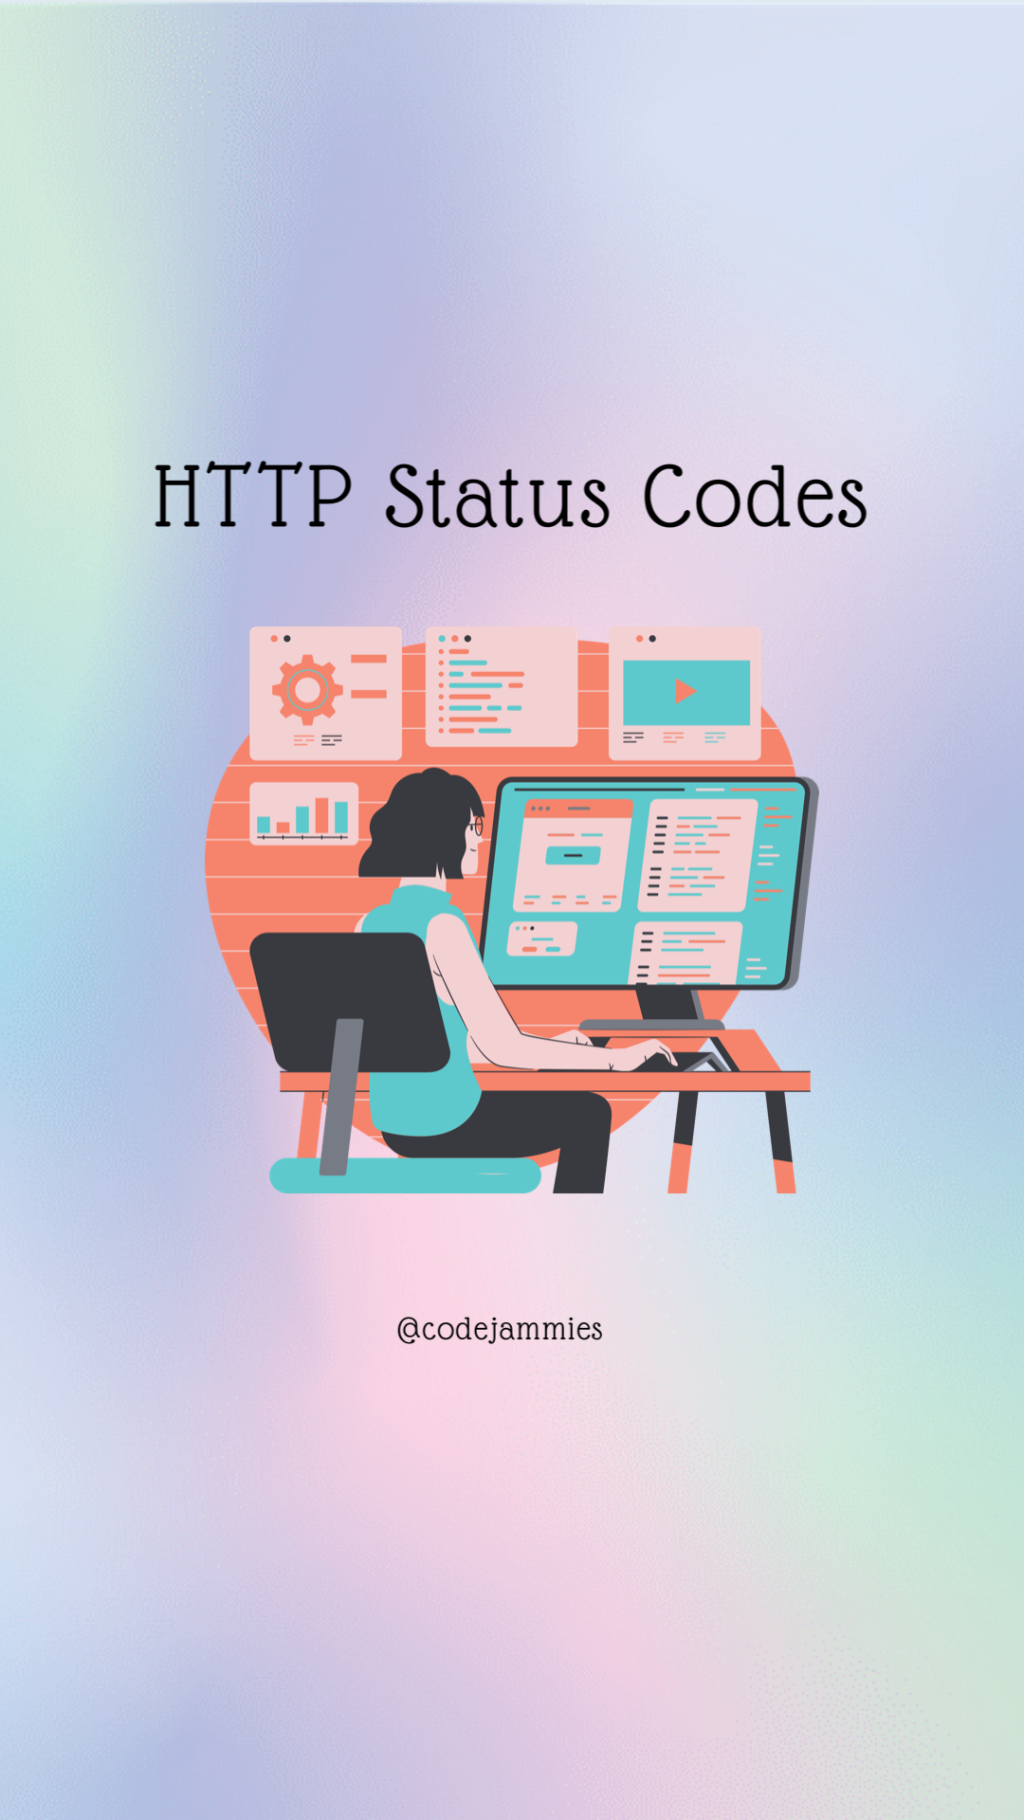 30 Seconds Read: HTTP Status Codes